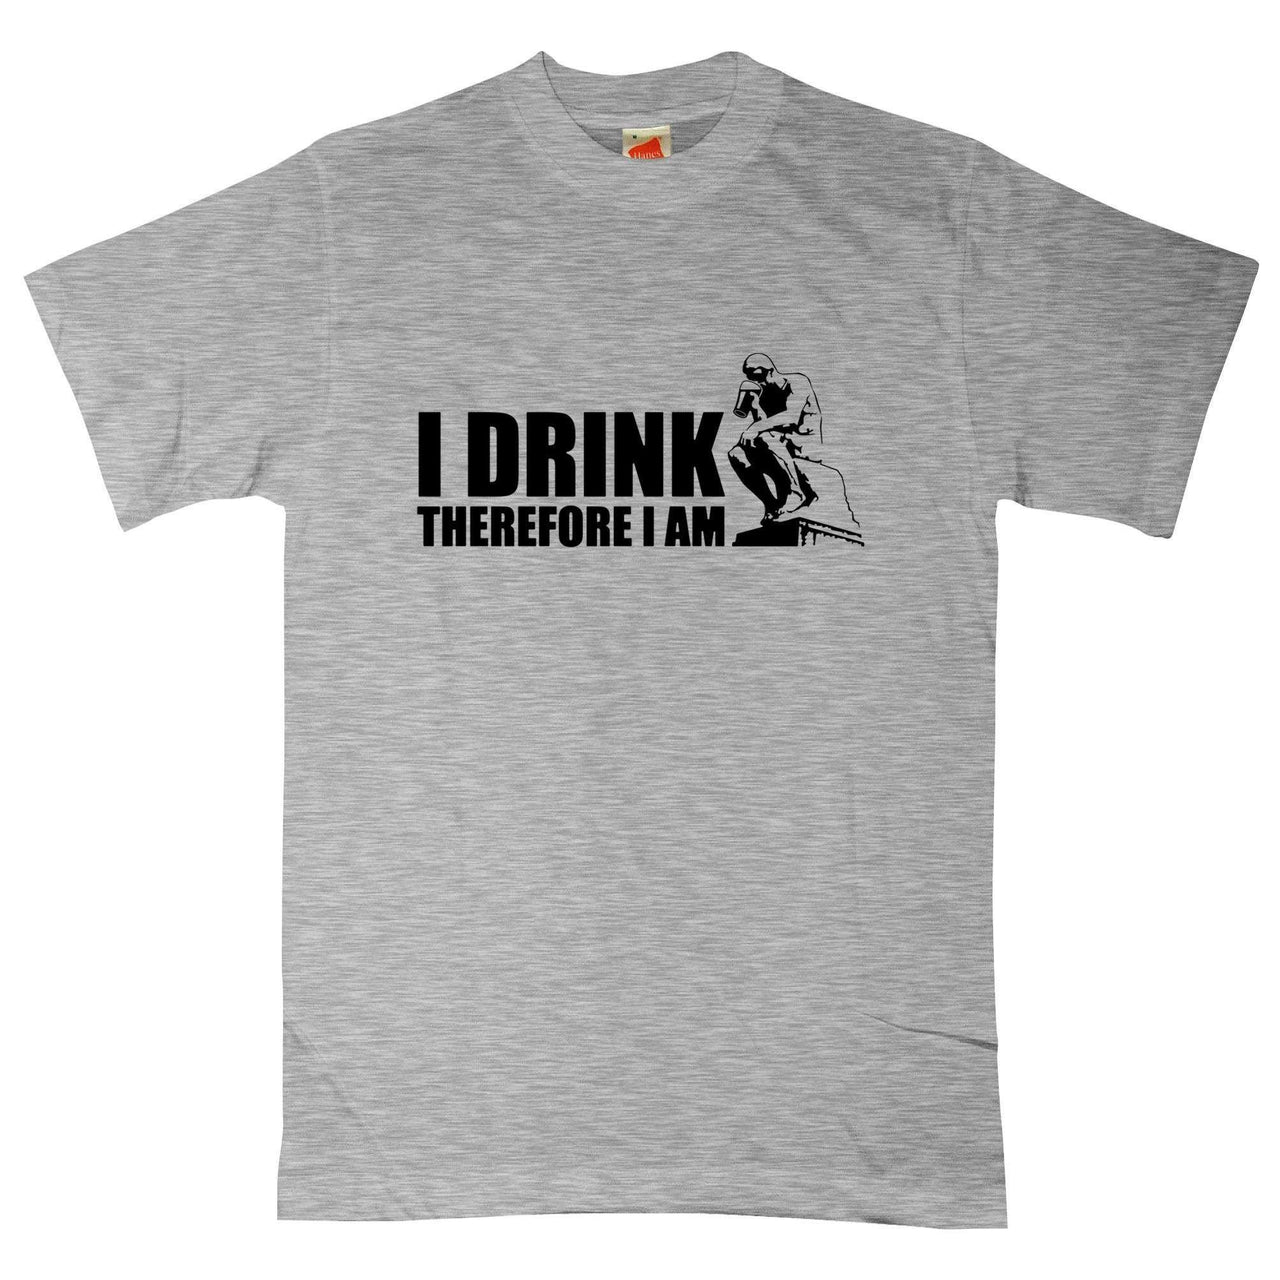 I Drink Therefore I Am Graphic T-Shirt For Men 8Ball